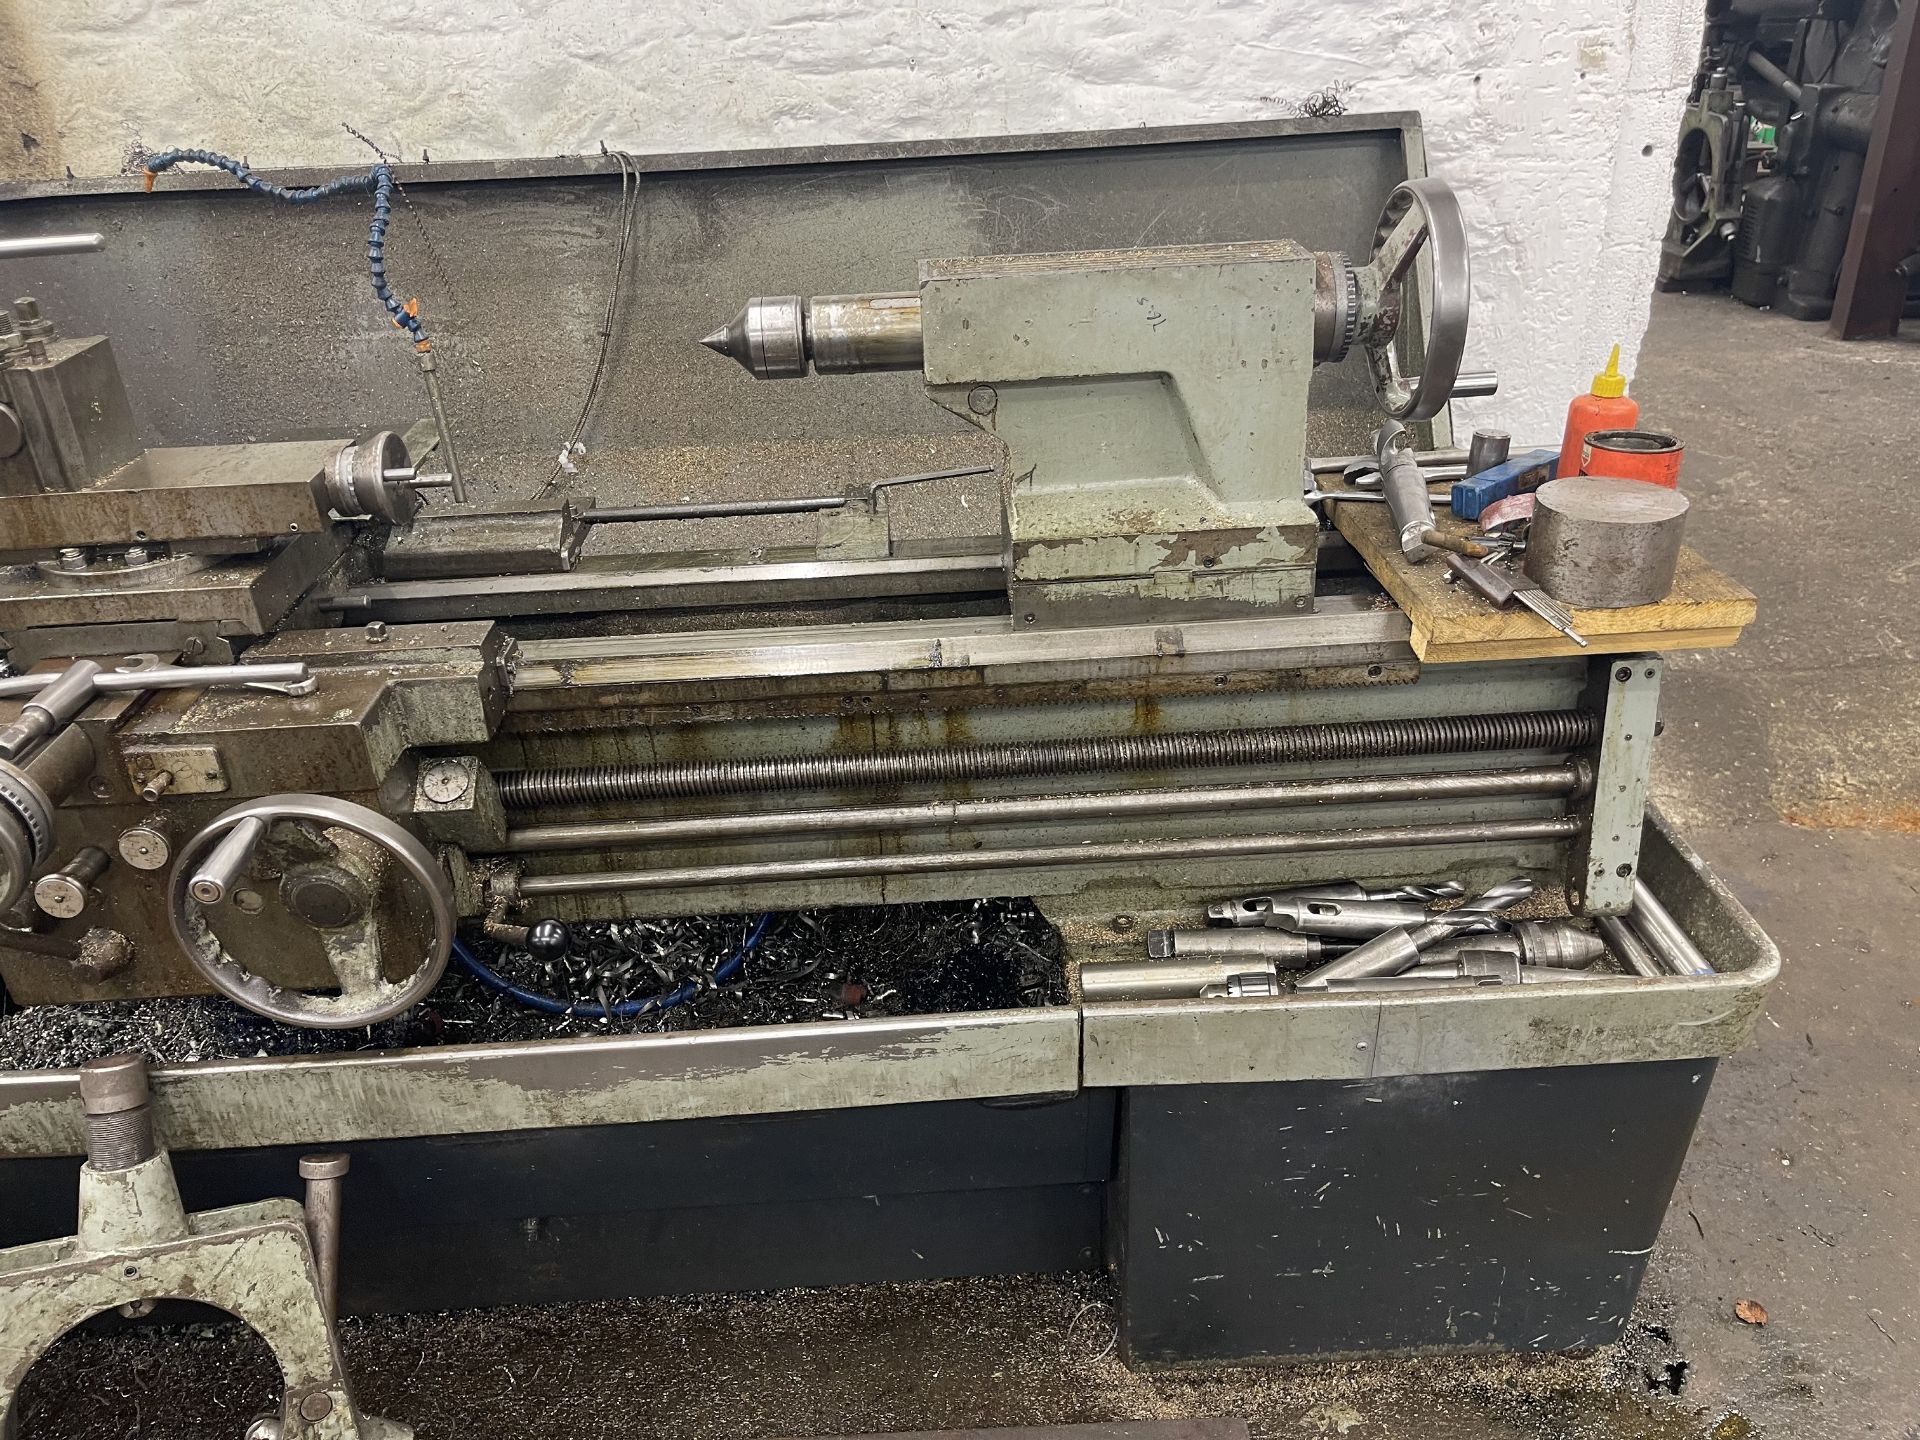 Colchester Mastiff 1400 GAP BED LATHE, taper turning, 3 and 4 jaw chucks, face plate, fixed - Image 3 of 4